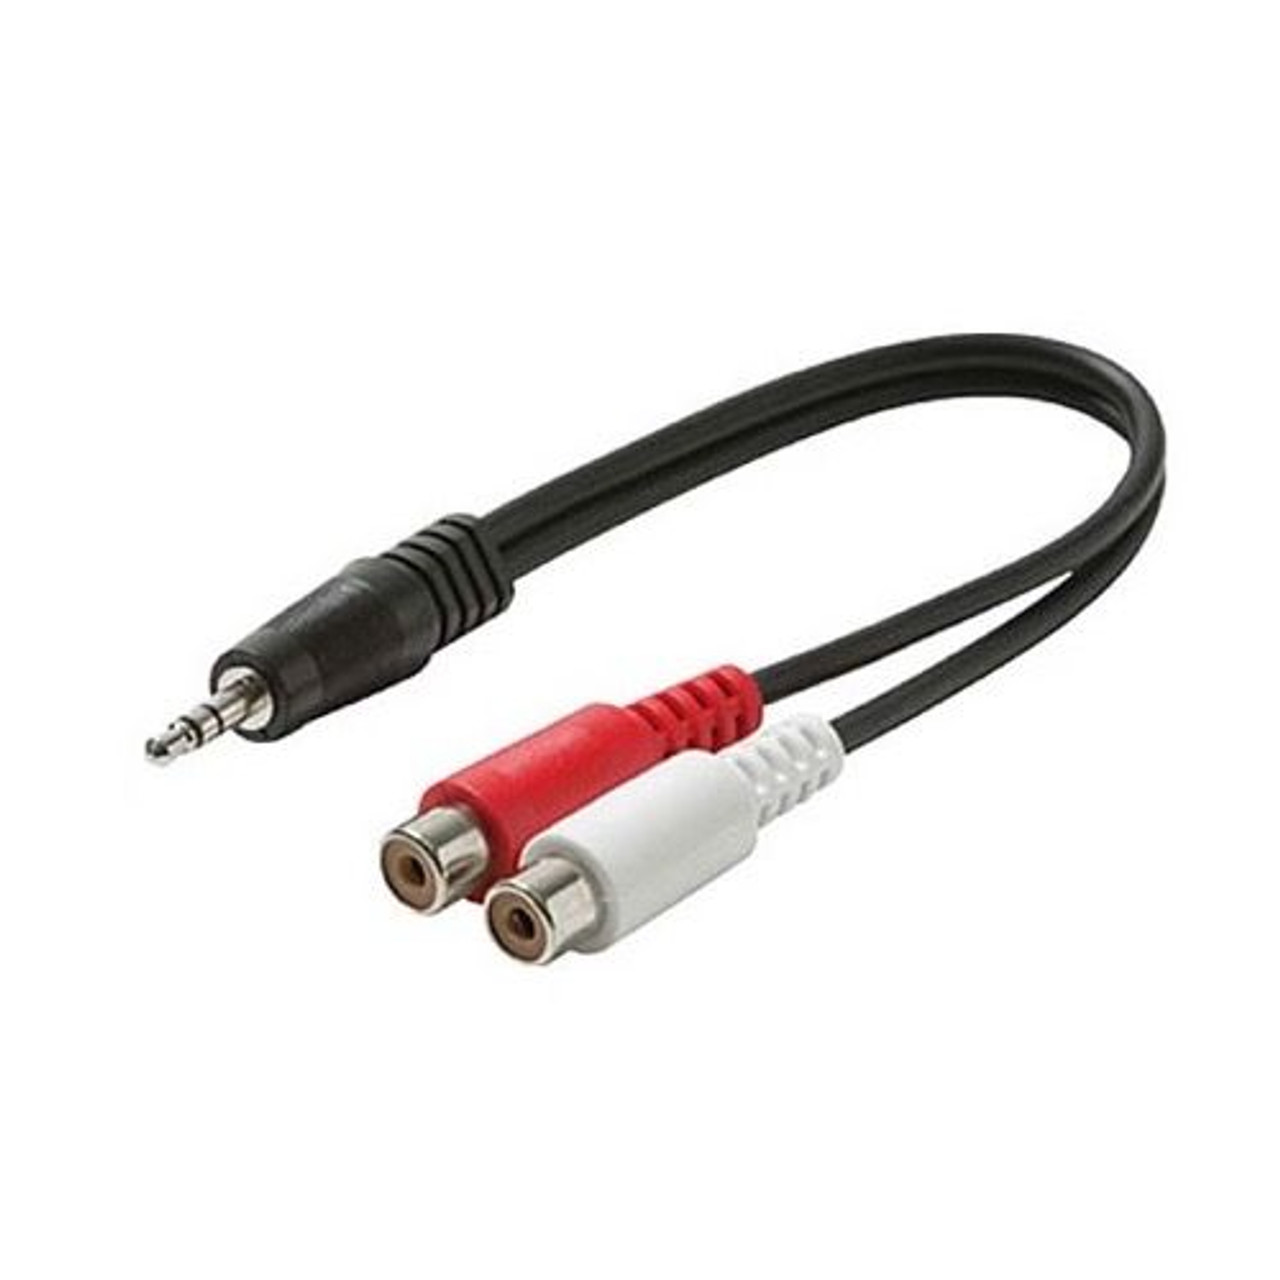 Steren 255-038 6" Inch 3.5mm Male To 2 Dual RCA Female Stereo Cable Y Male to RCA Cable Adapter Shielded 3.5 mm to RCA Audio Splitter Cable Signal Separating Shielded Push-In Component Jack Plug Connector